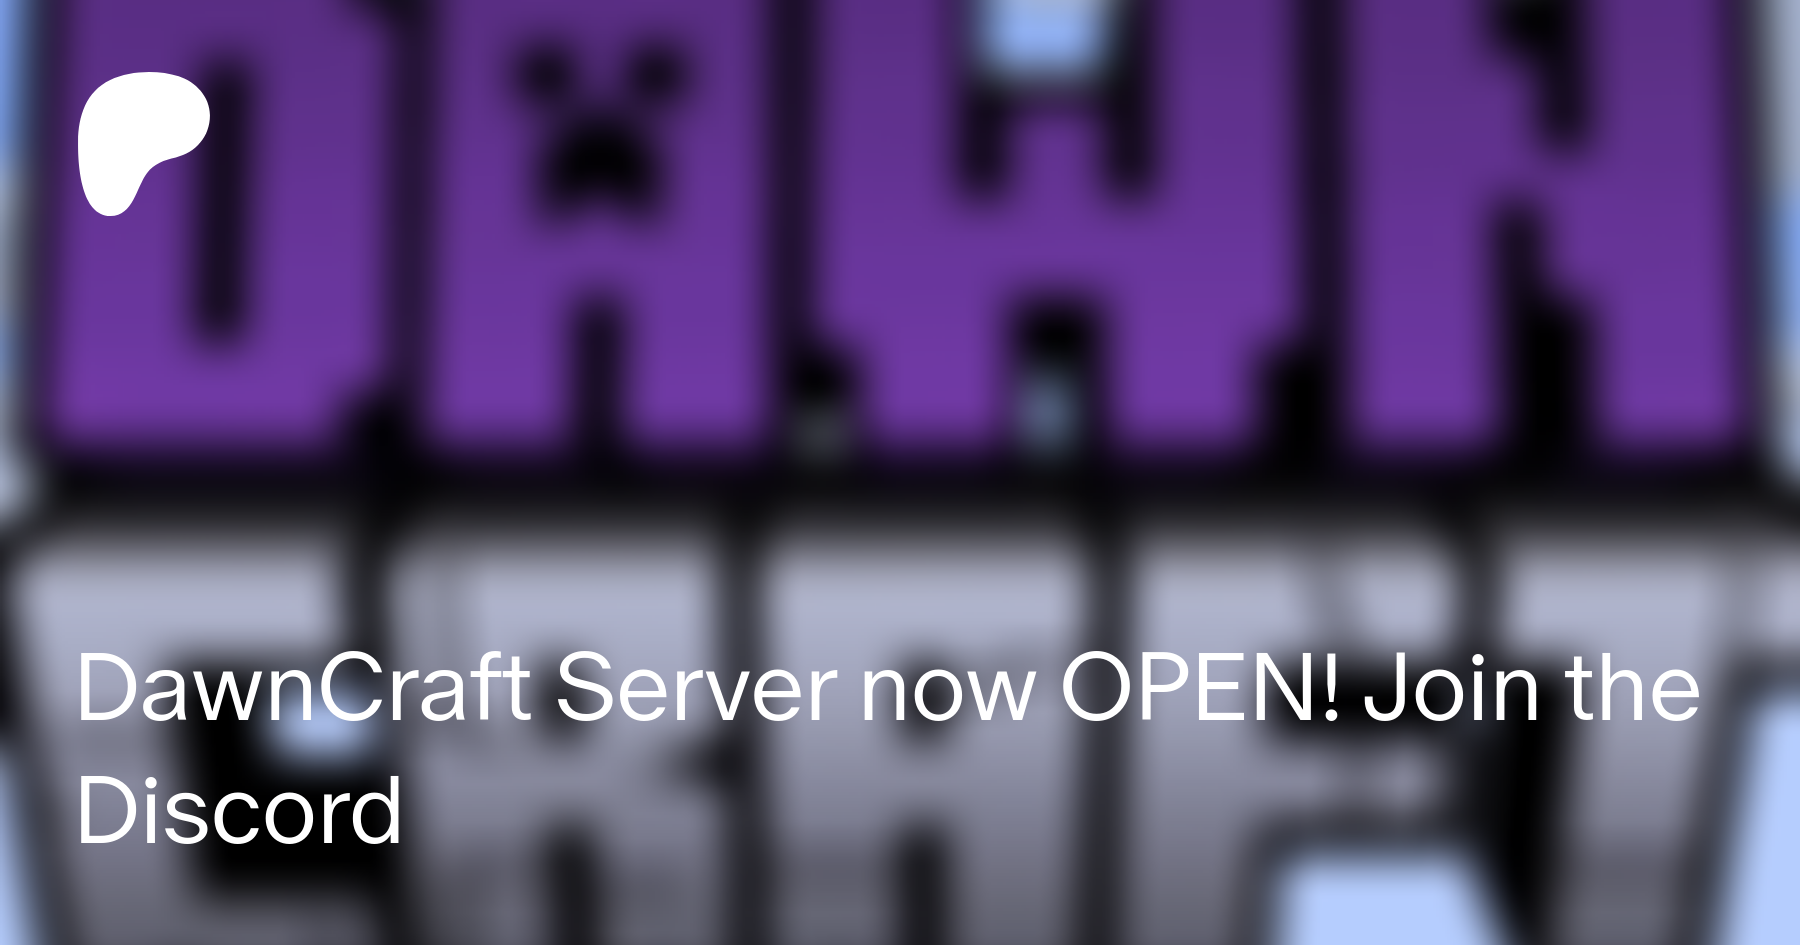 DawnCraft Server now OPEN! Join the Discord